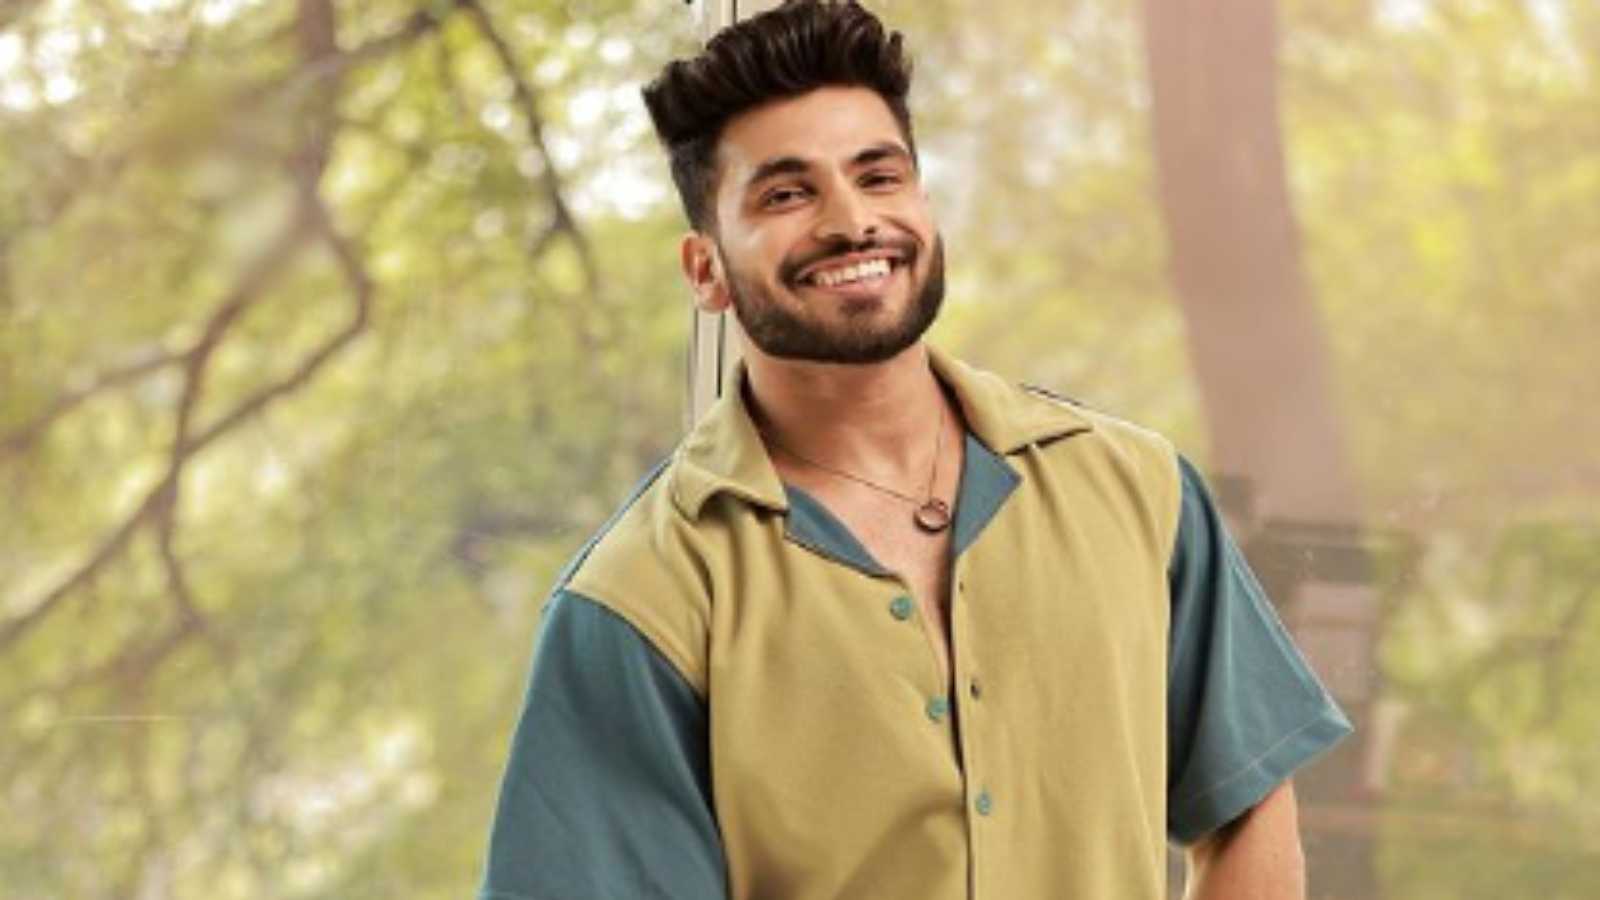 Shiv Thakare's cameo in the latest season of Roadies will leave his fans both excited and nostalgic